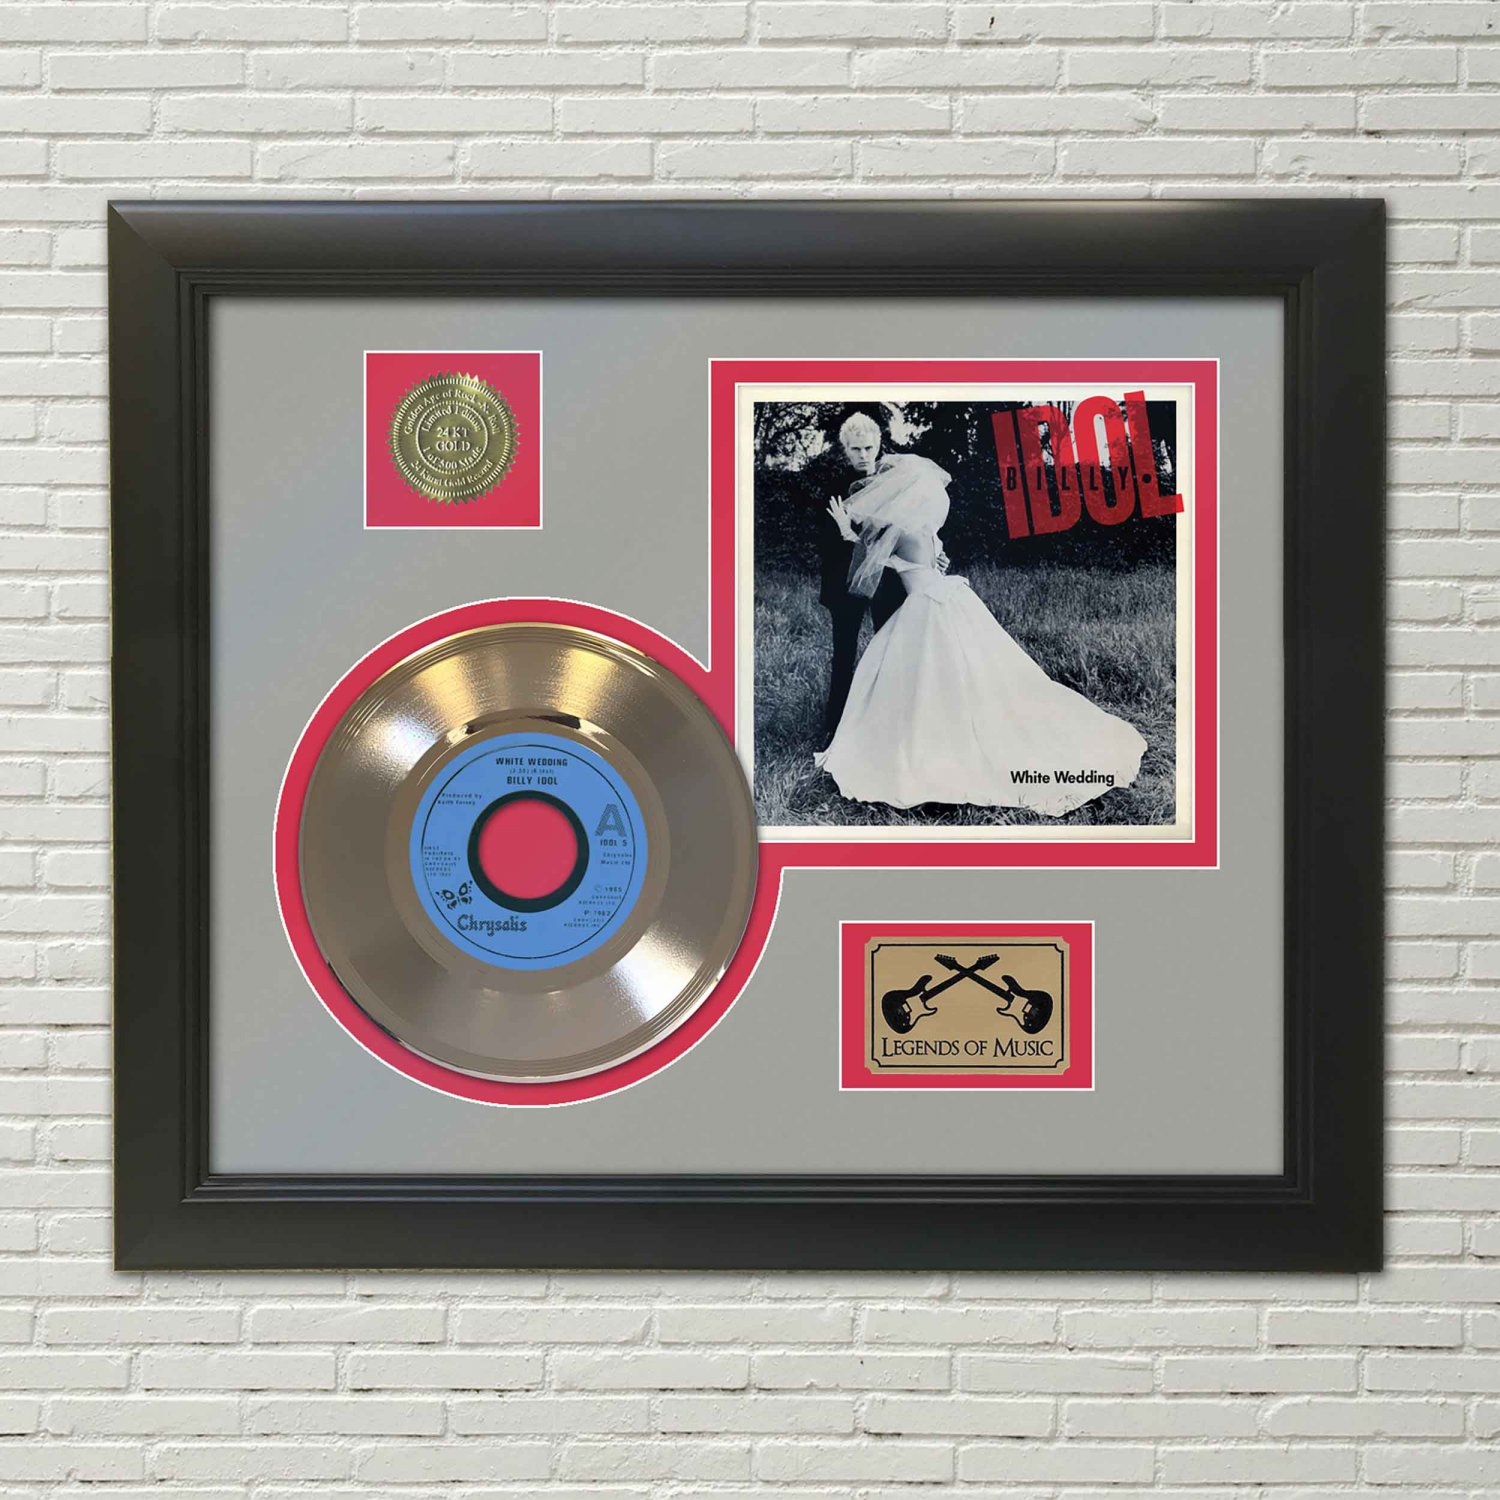 BILLY IDOL "White Wedding" Framed Picture Sleeve Gold 45 Record Display